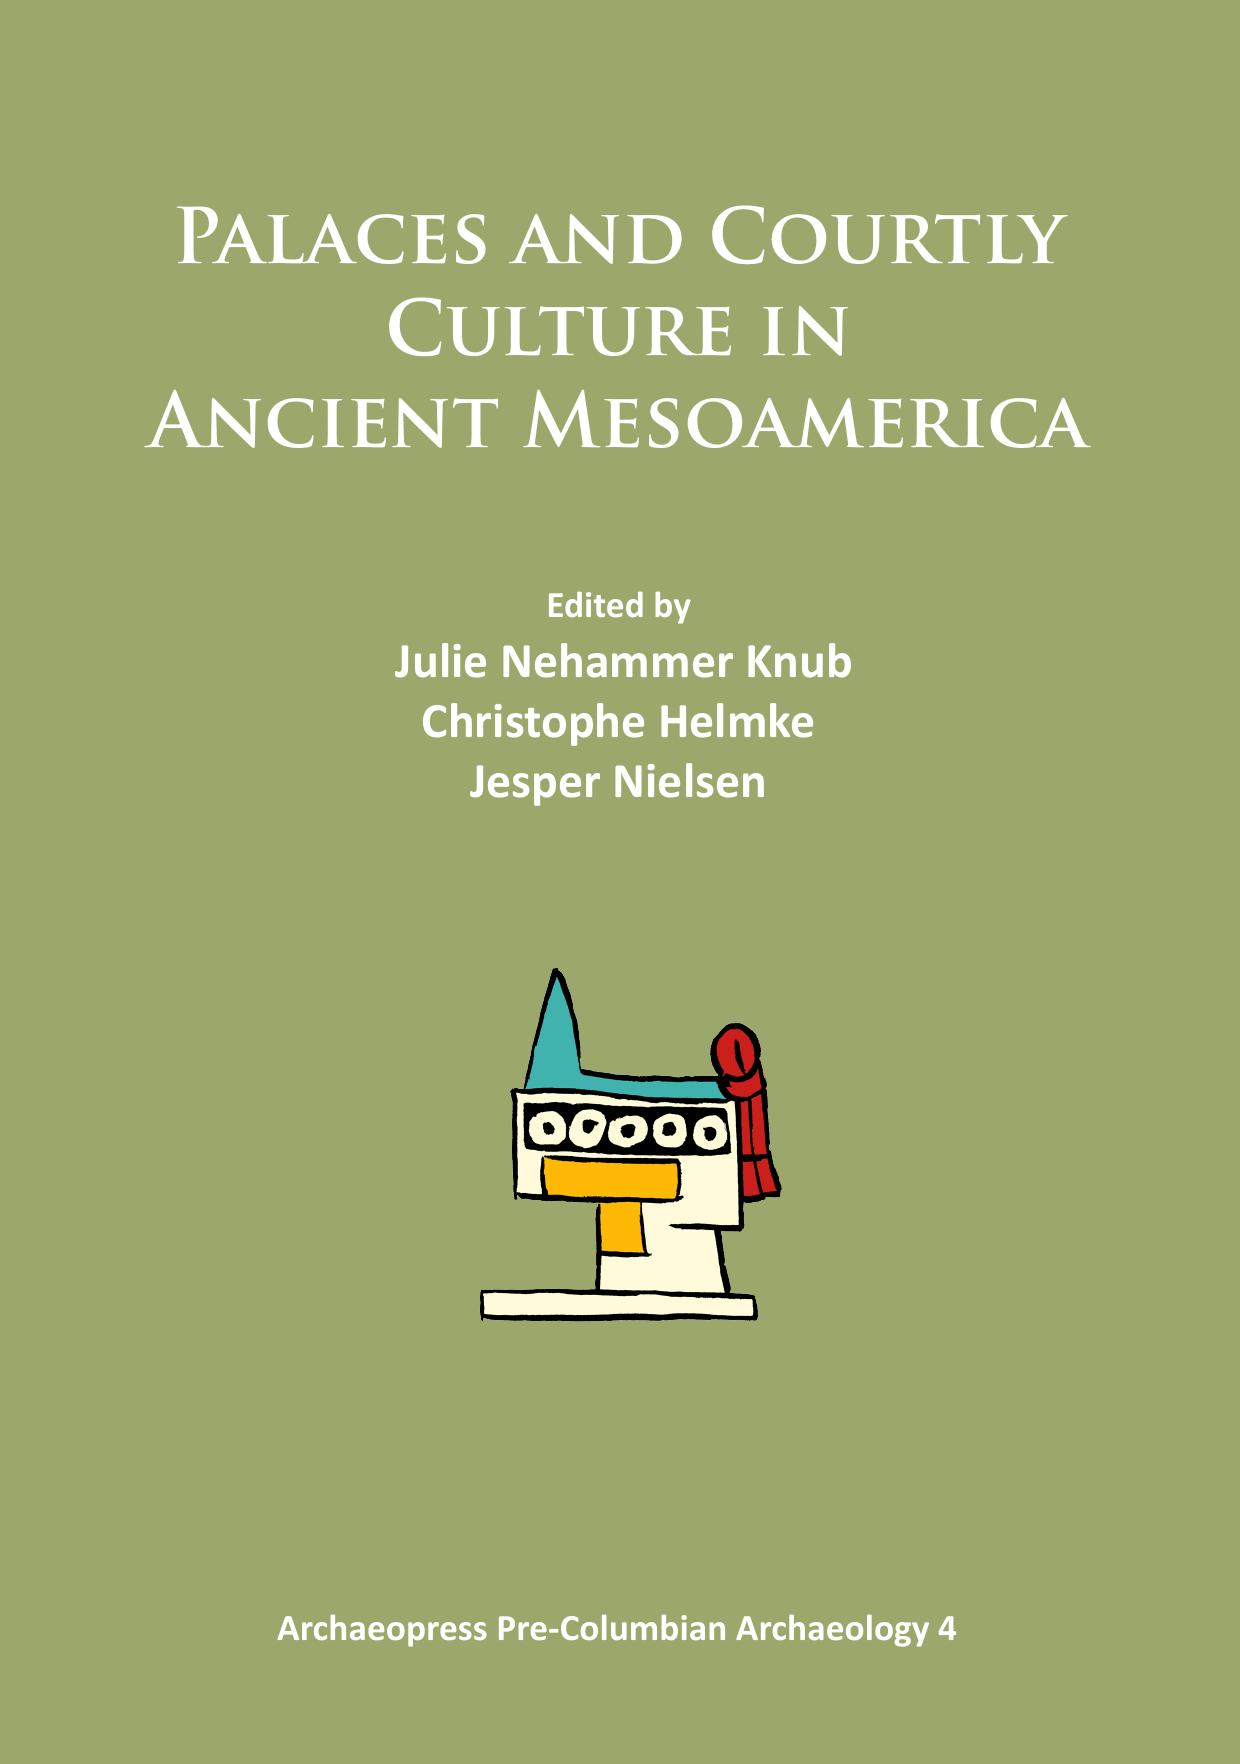 Palaces and Courtly Culture in Ancient Mesoamerica by Julie Nehammer Knub; Christophe Helmke; Jesper Nielsen